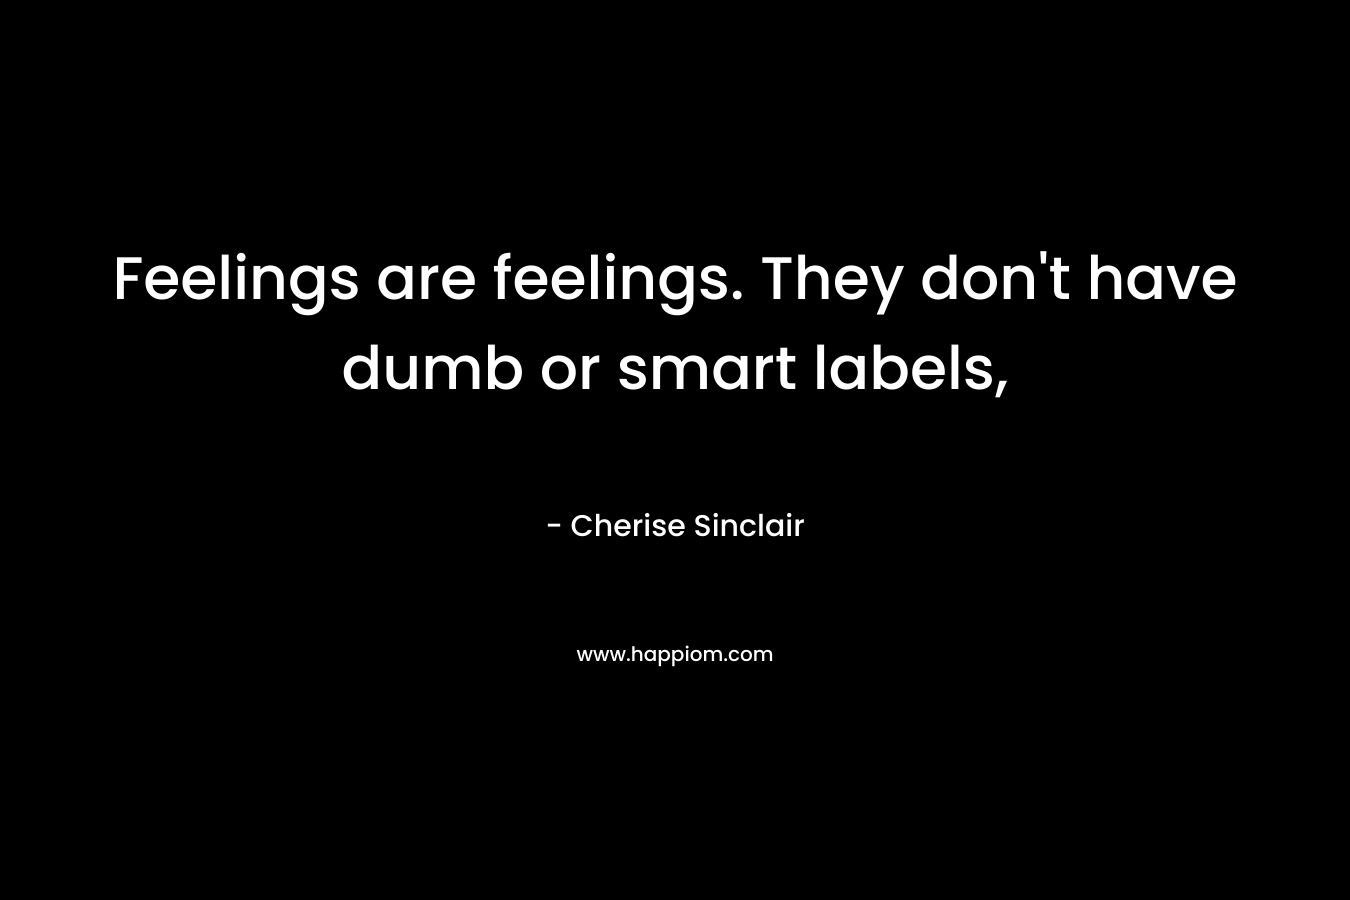 Feelings are feelings. They don’t have dumb or smart labels, – Cherise Sinclair